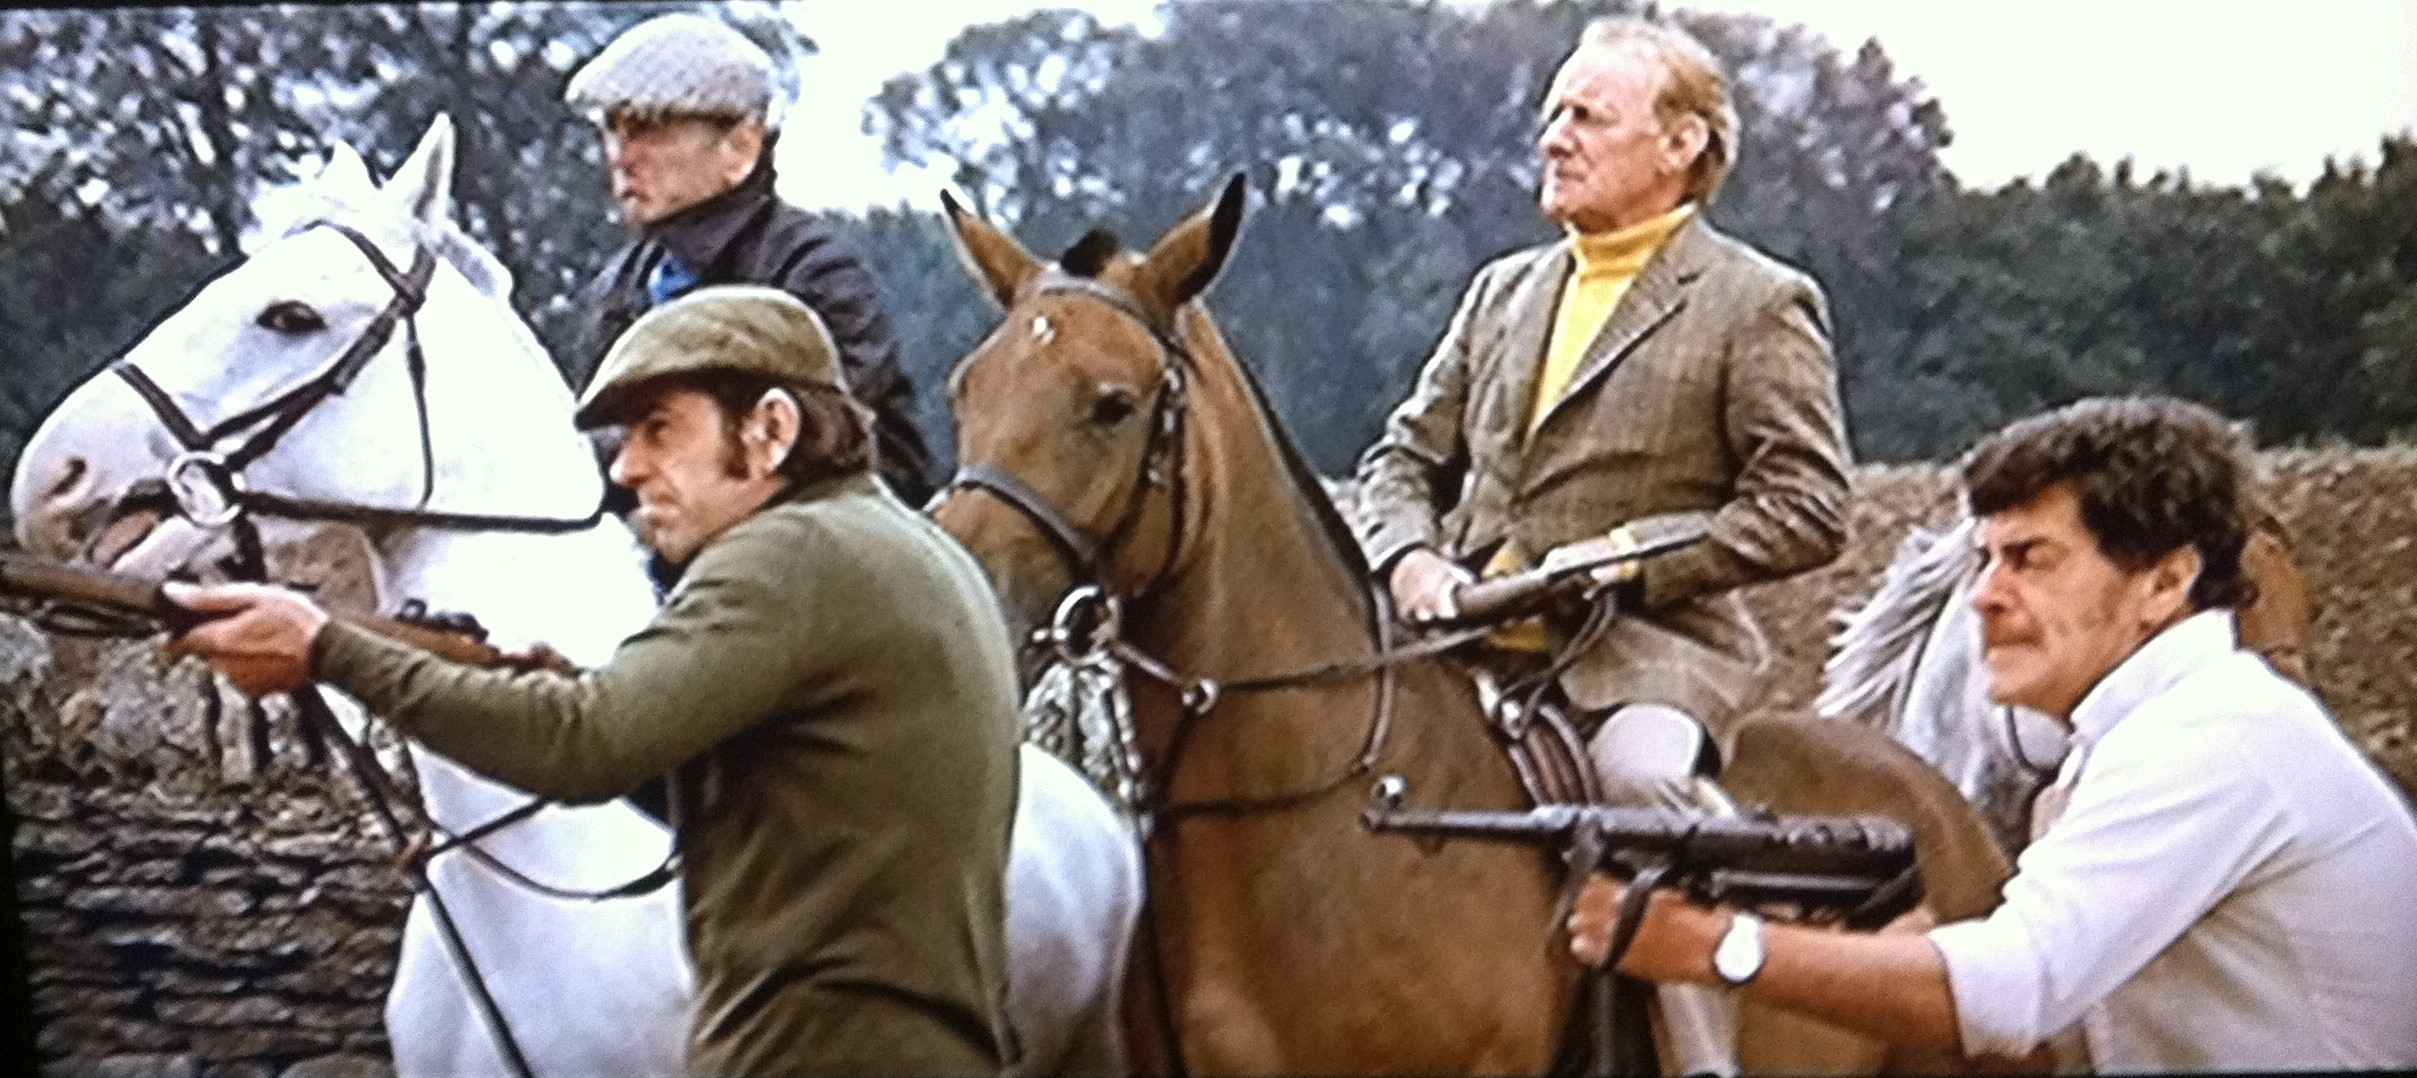 Rick in a scene from 11 HARROW HOUSE, with Trevor Howard, and fellow Stunt Performers.